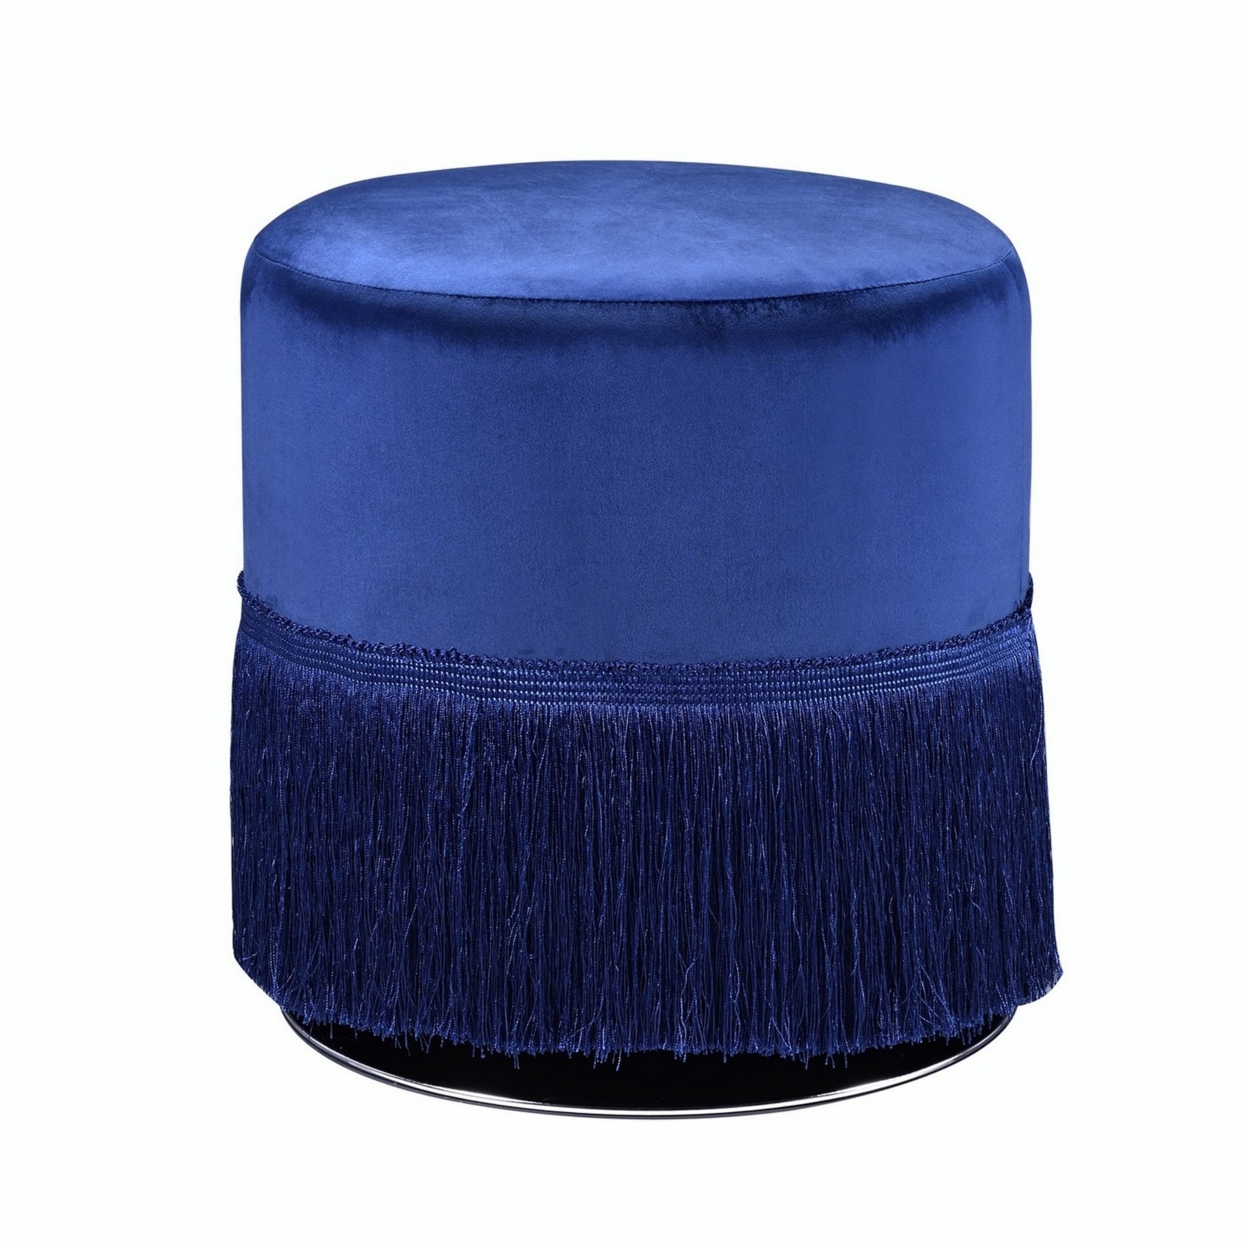 Fabric Upholstered Round Ottoman With Fringes And Metal Base, Dark Blue- Saltoro Sherpi